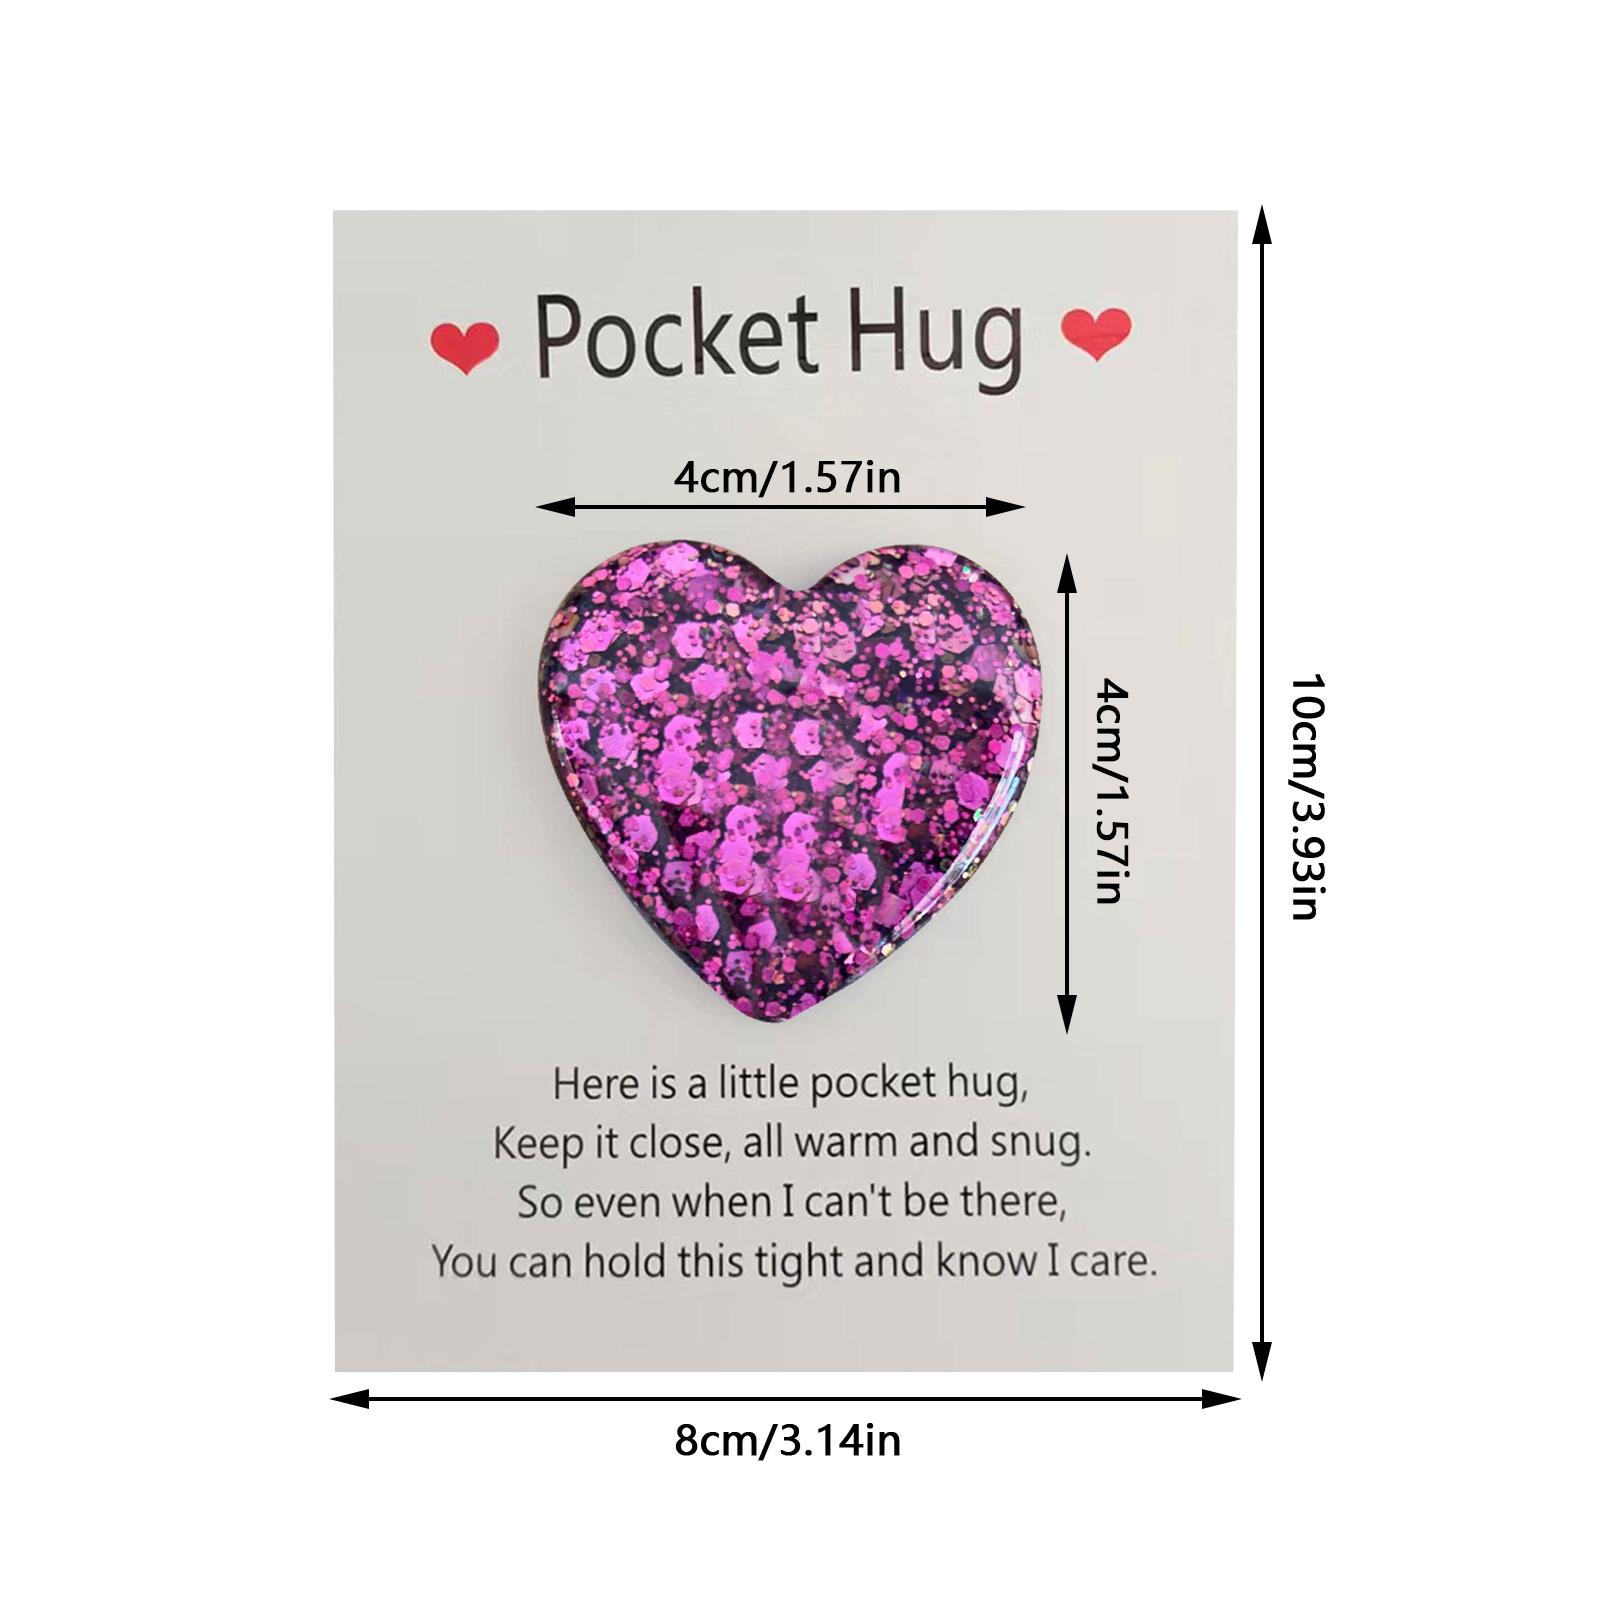 Pocket Hug Heart Token with Greeting Card Mini Cute Pocket Hug Decoration Keepsake Cheer up Gifts for Friends Colleagues Family - image 5 of 5